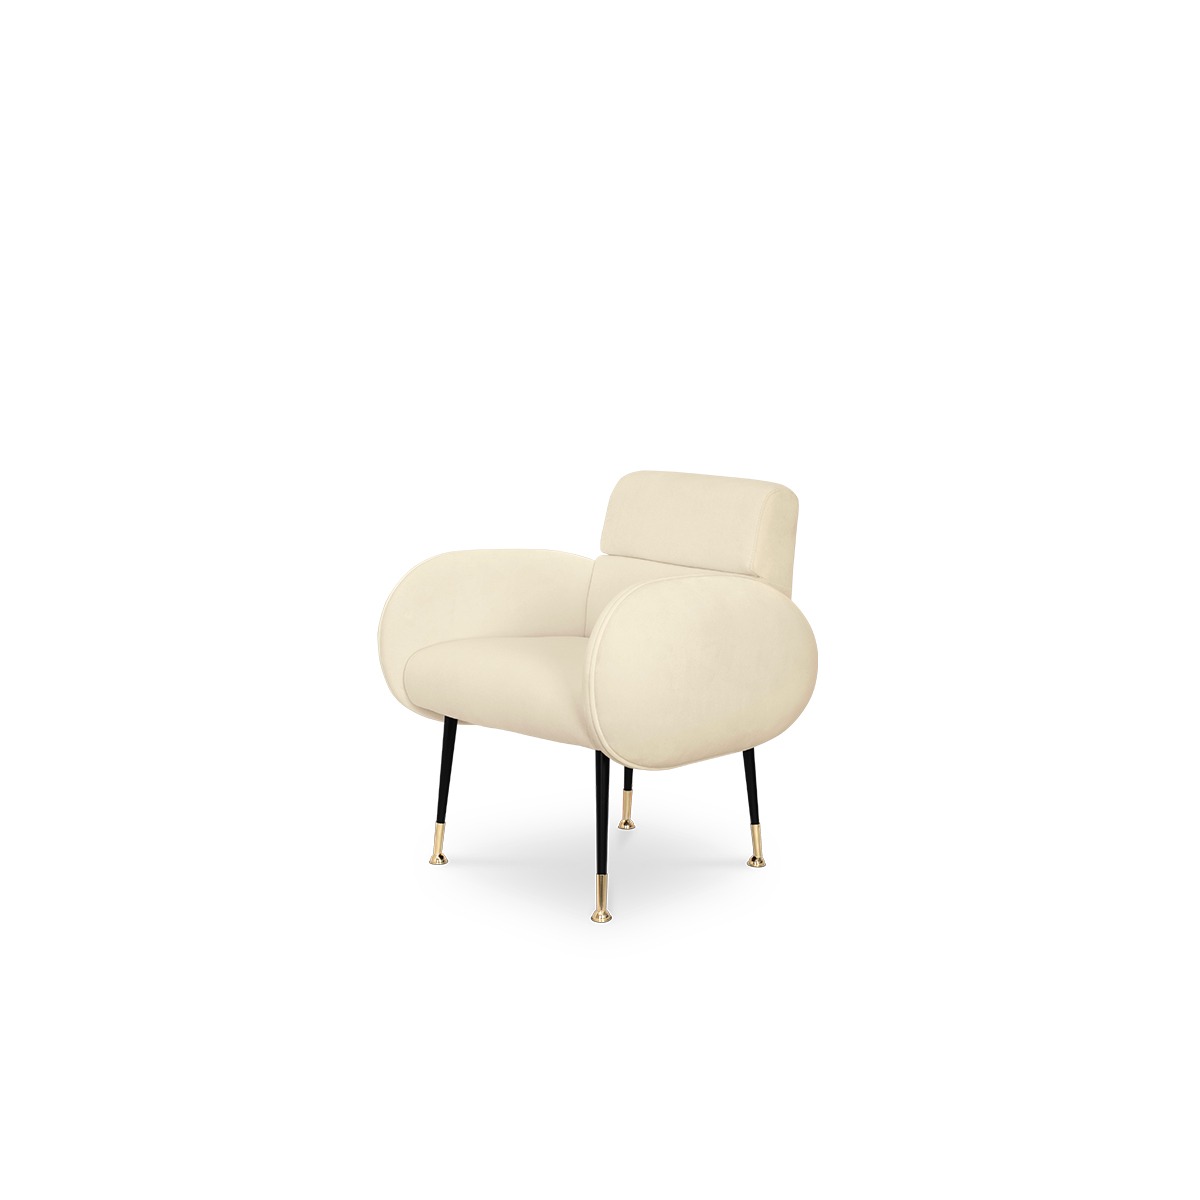 EH marco dining chair Bloom III Chair